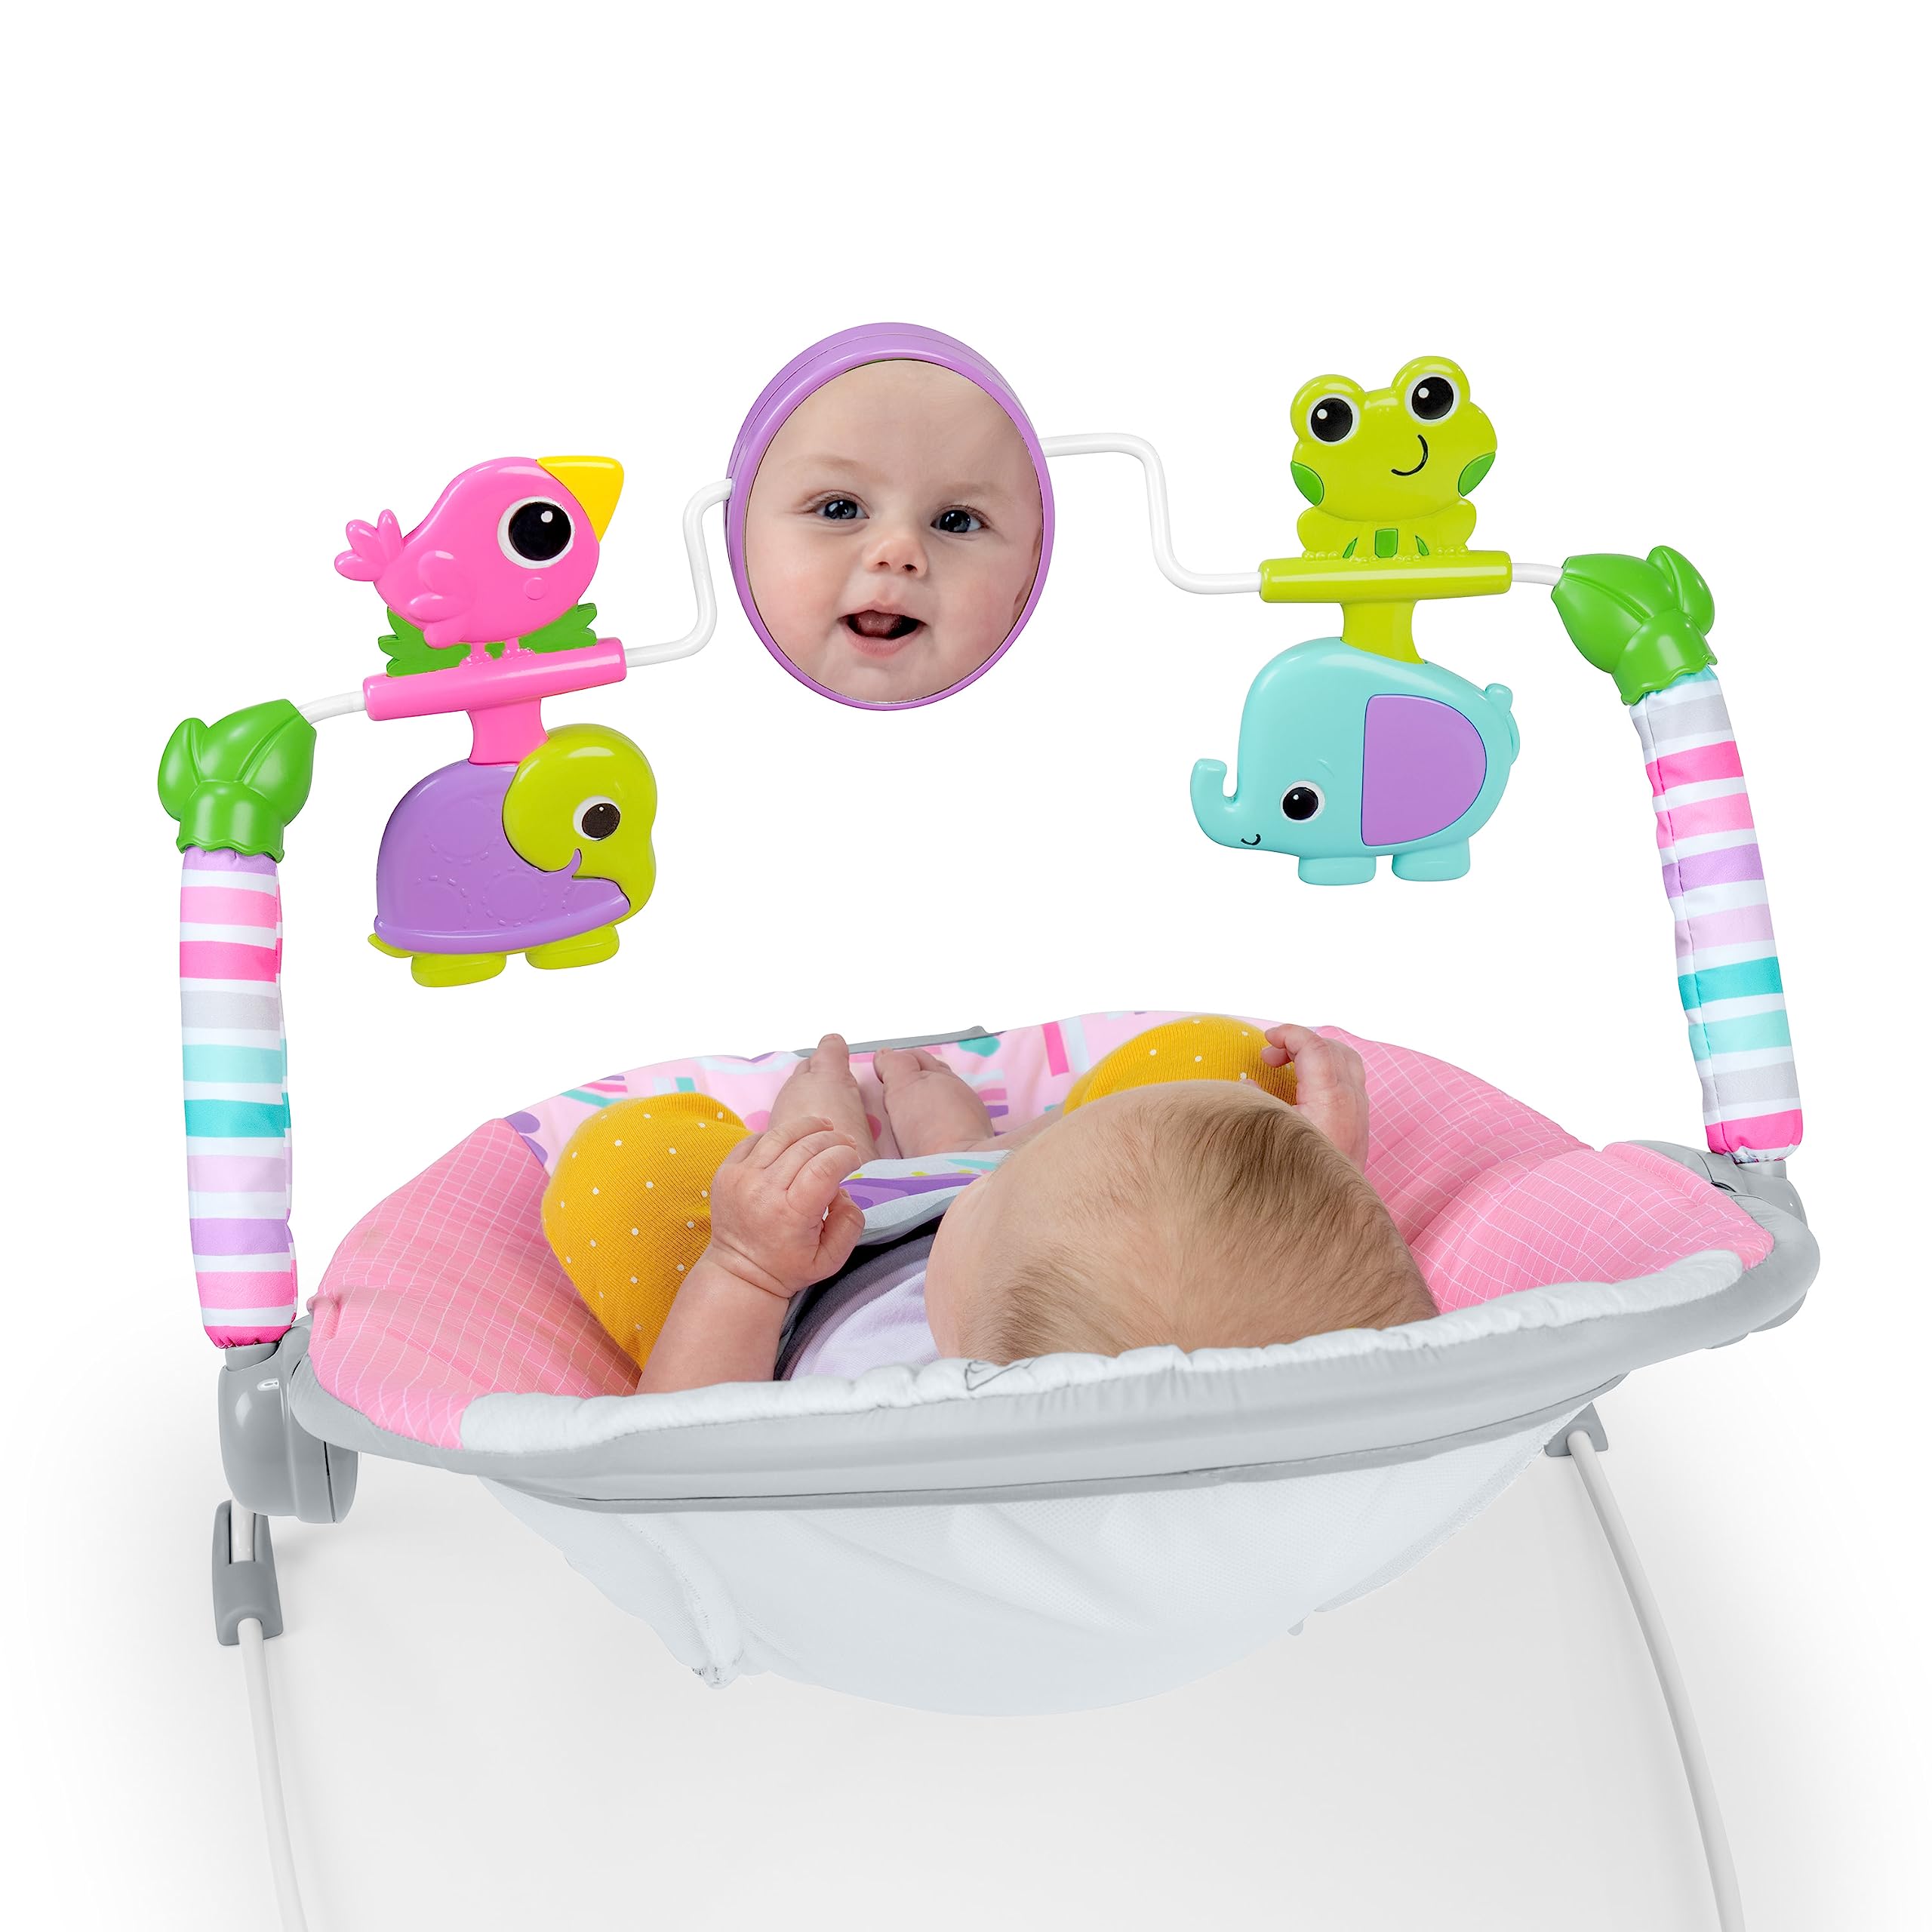 Bright Starts Pink Paradise Portable Baby Bouncer with Vibrating Infant Seat and -Toy Bar, Max Weight 20 lbs., Age 0-6 Months